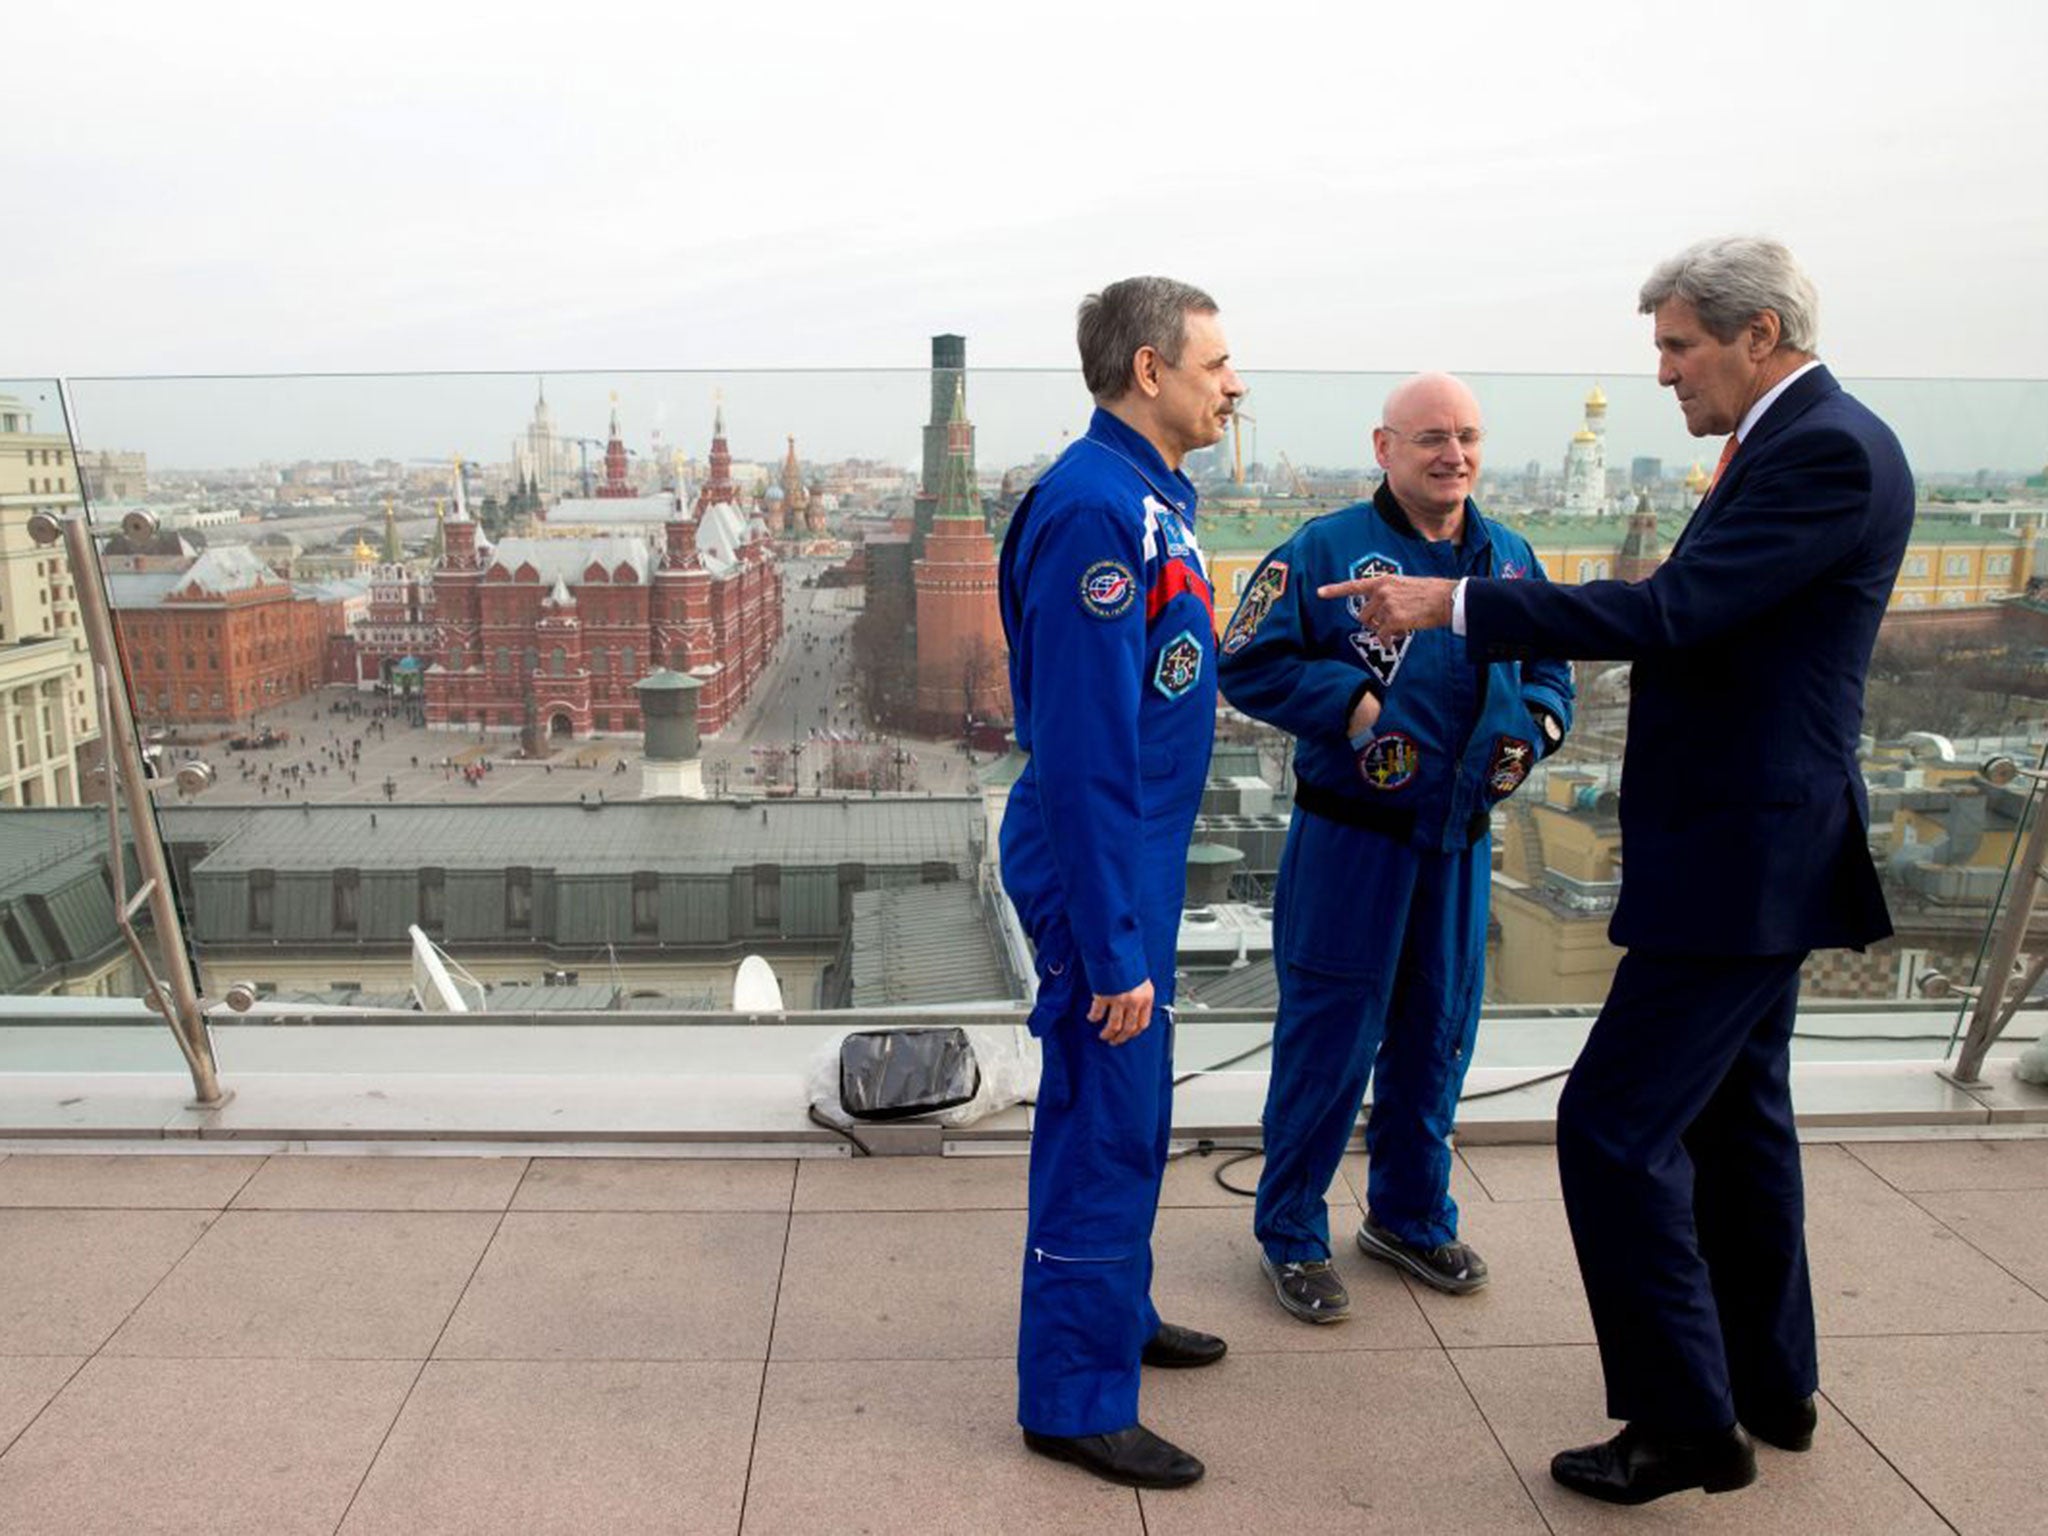 &#13;
John Kerry meets with American astronaut Scott Kelly, centre, and Russian cosmonaut Mikhail Korniyenko on the roof of the Ritz-Carlton Hotel in Moscow &#13;